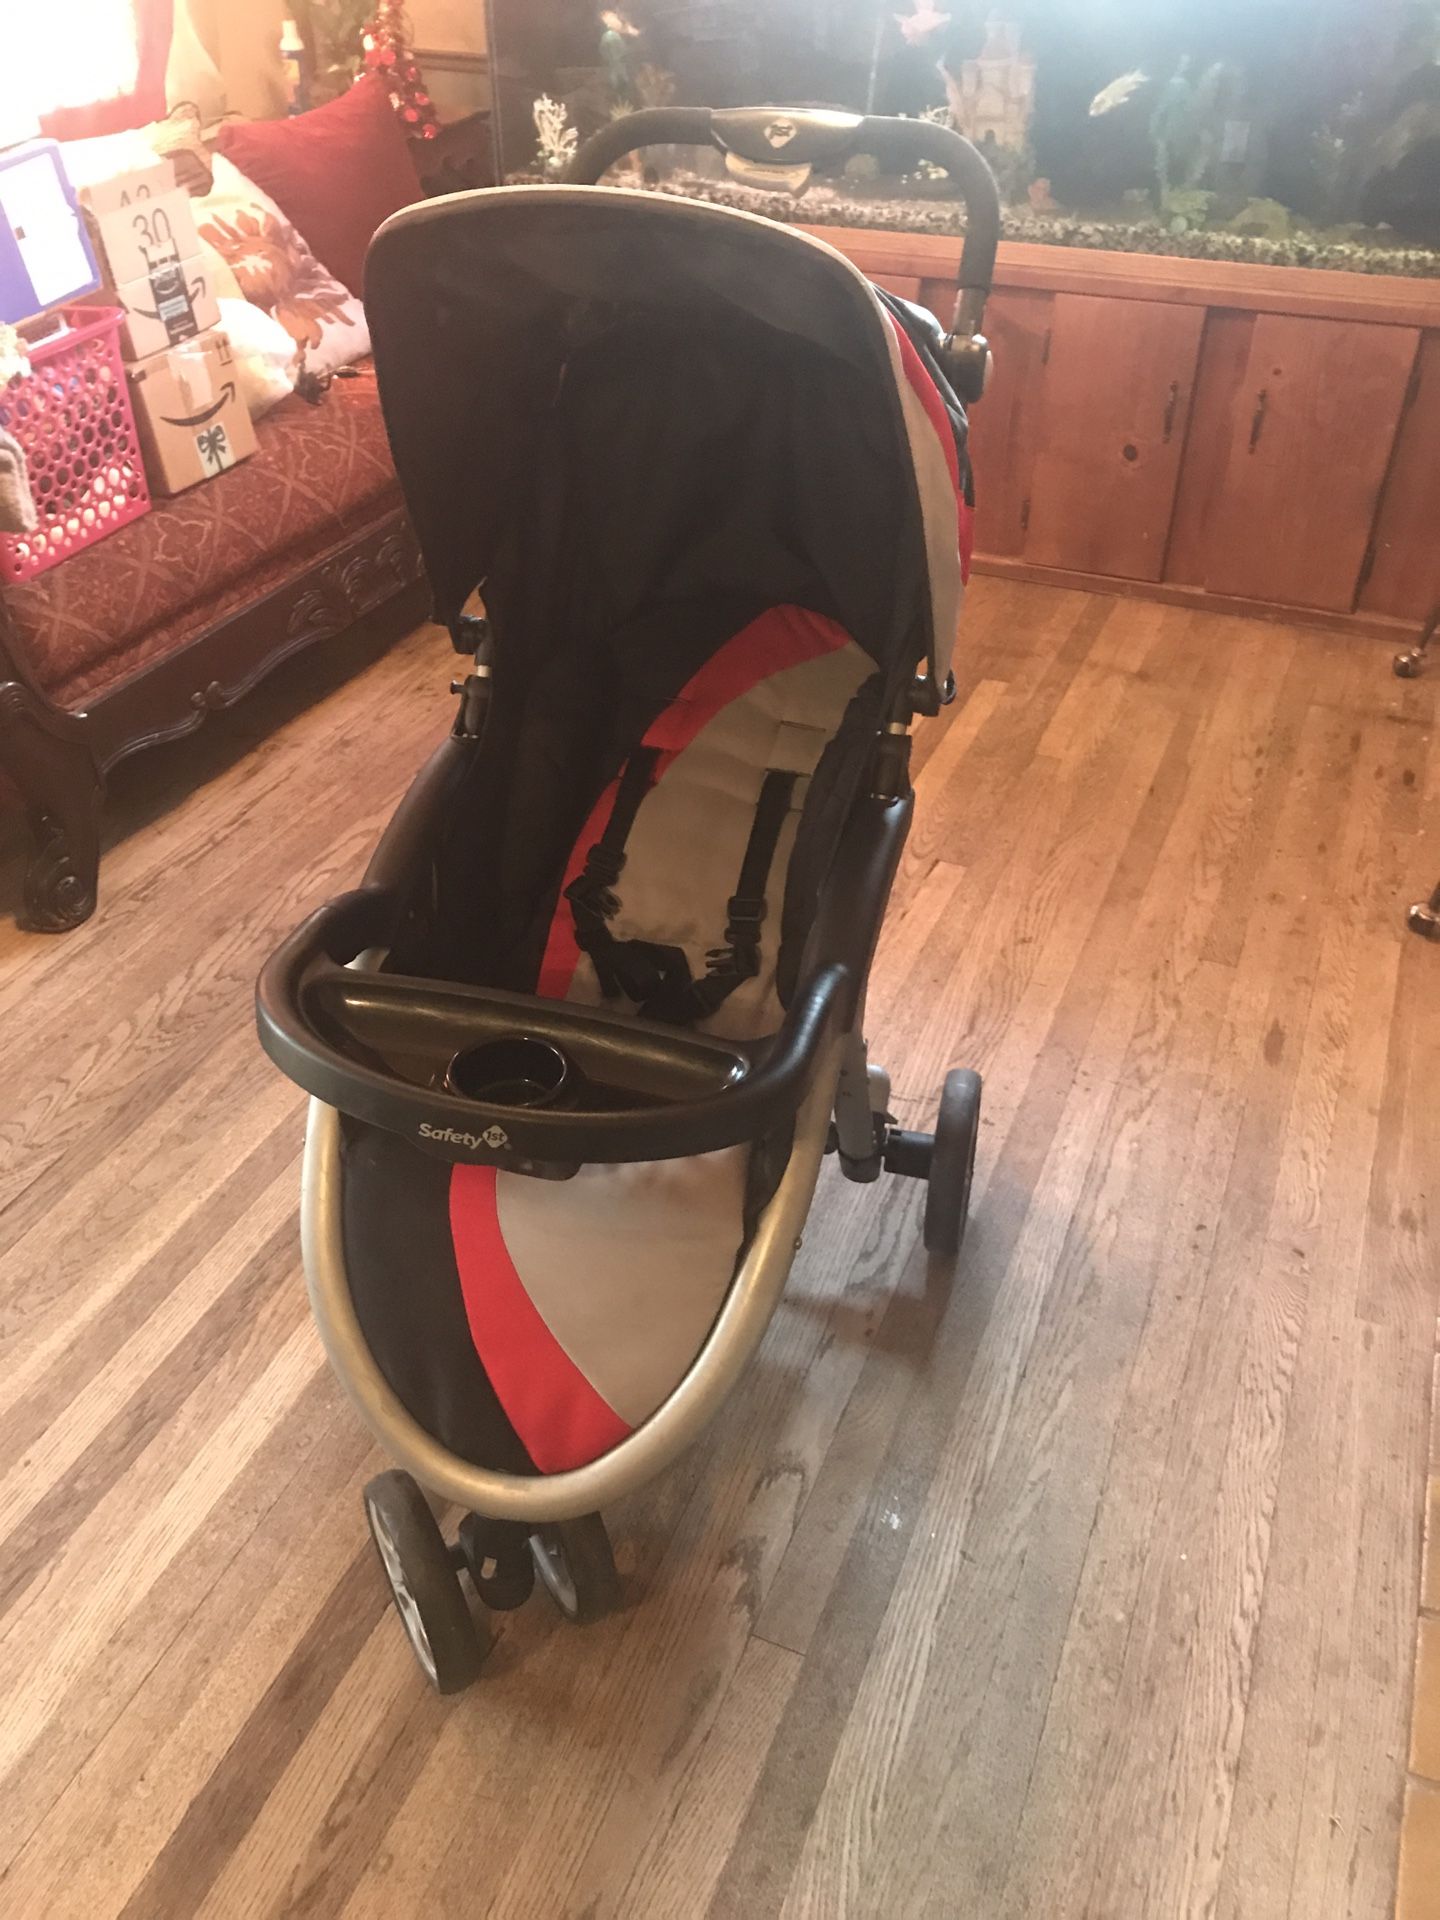 Baby stroller and car seat/carrier by Safety 1st